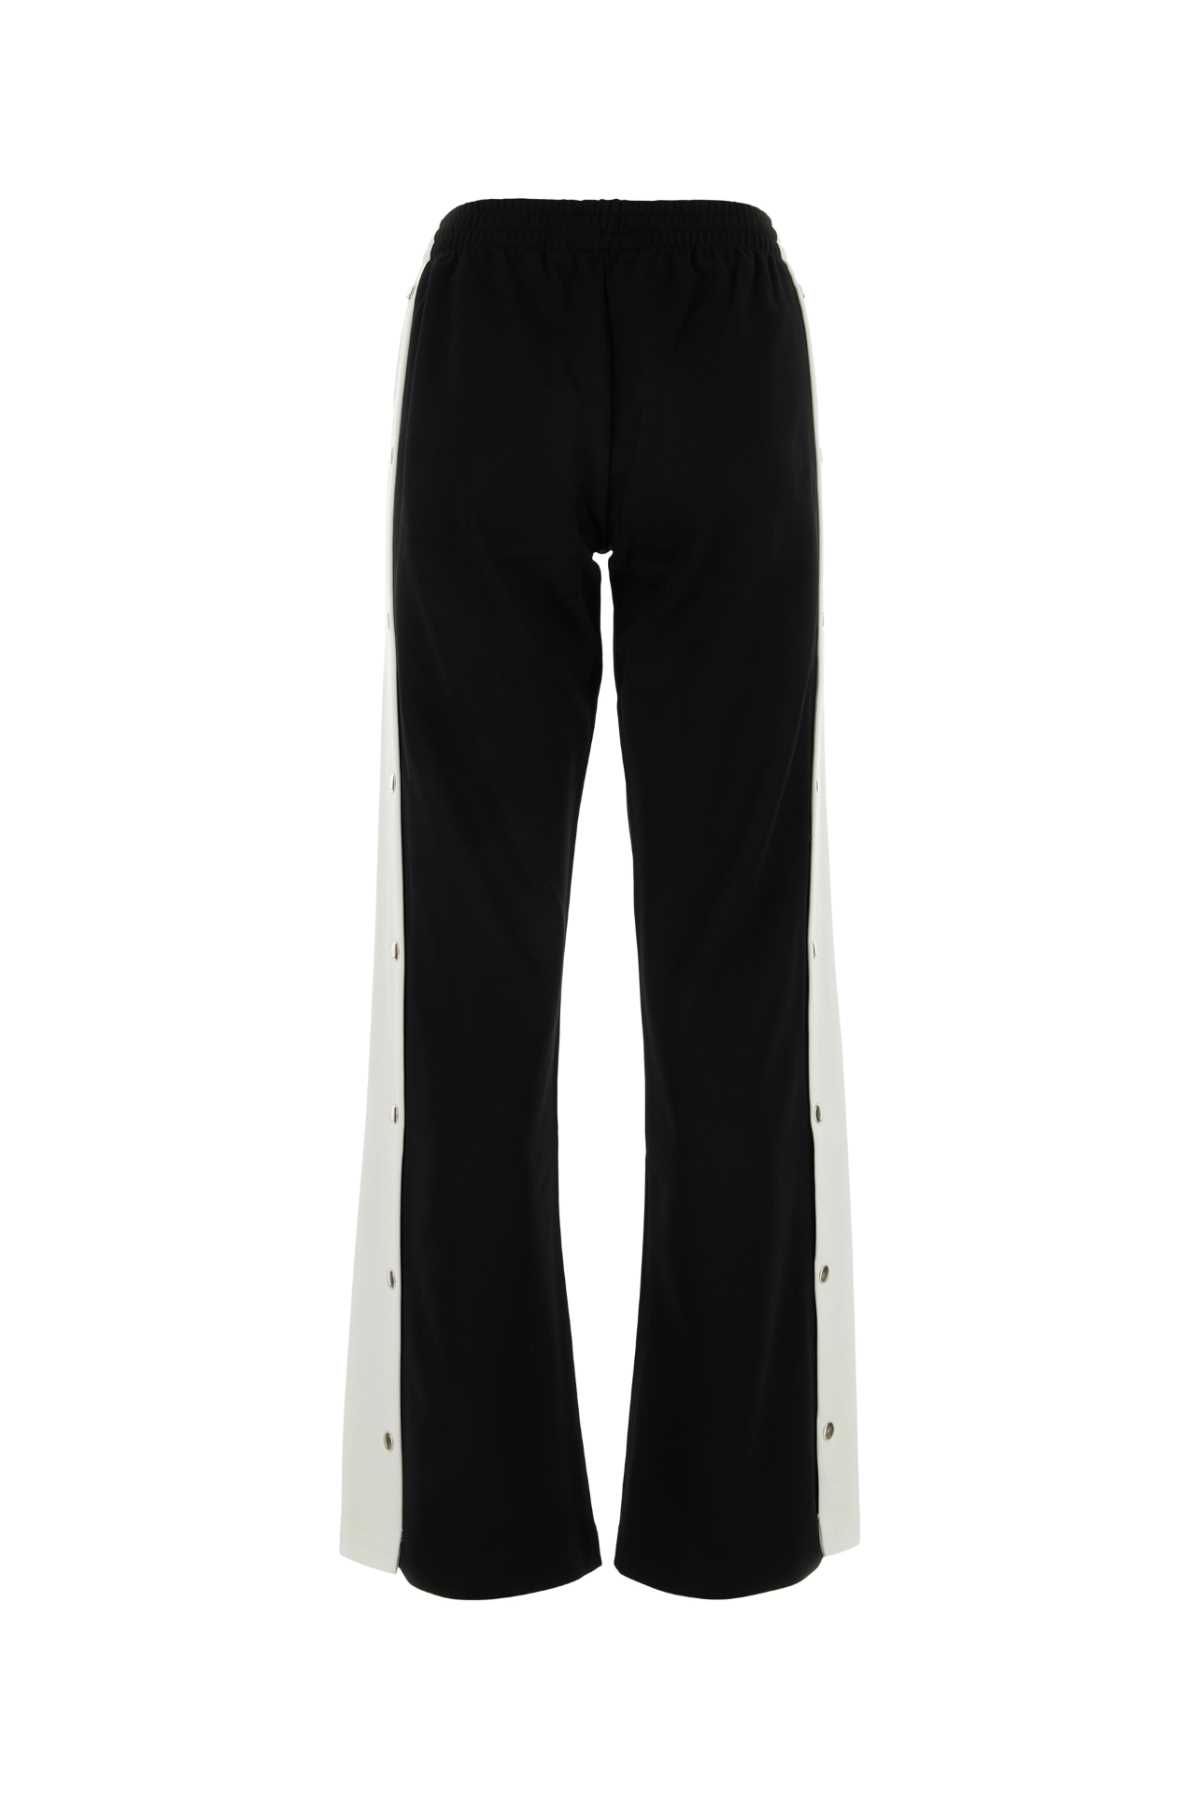 Shop Givenchy Black Polyester Blend Joggers In Black/white